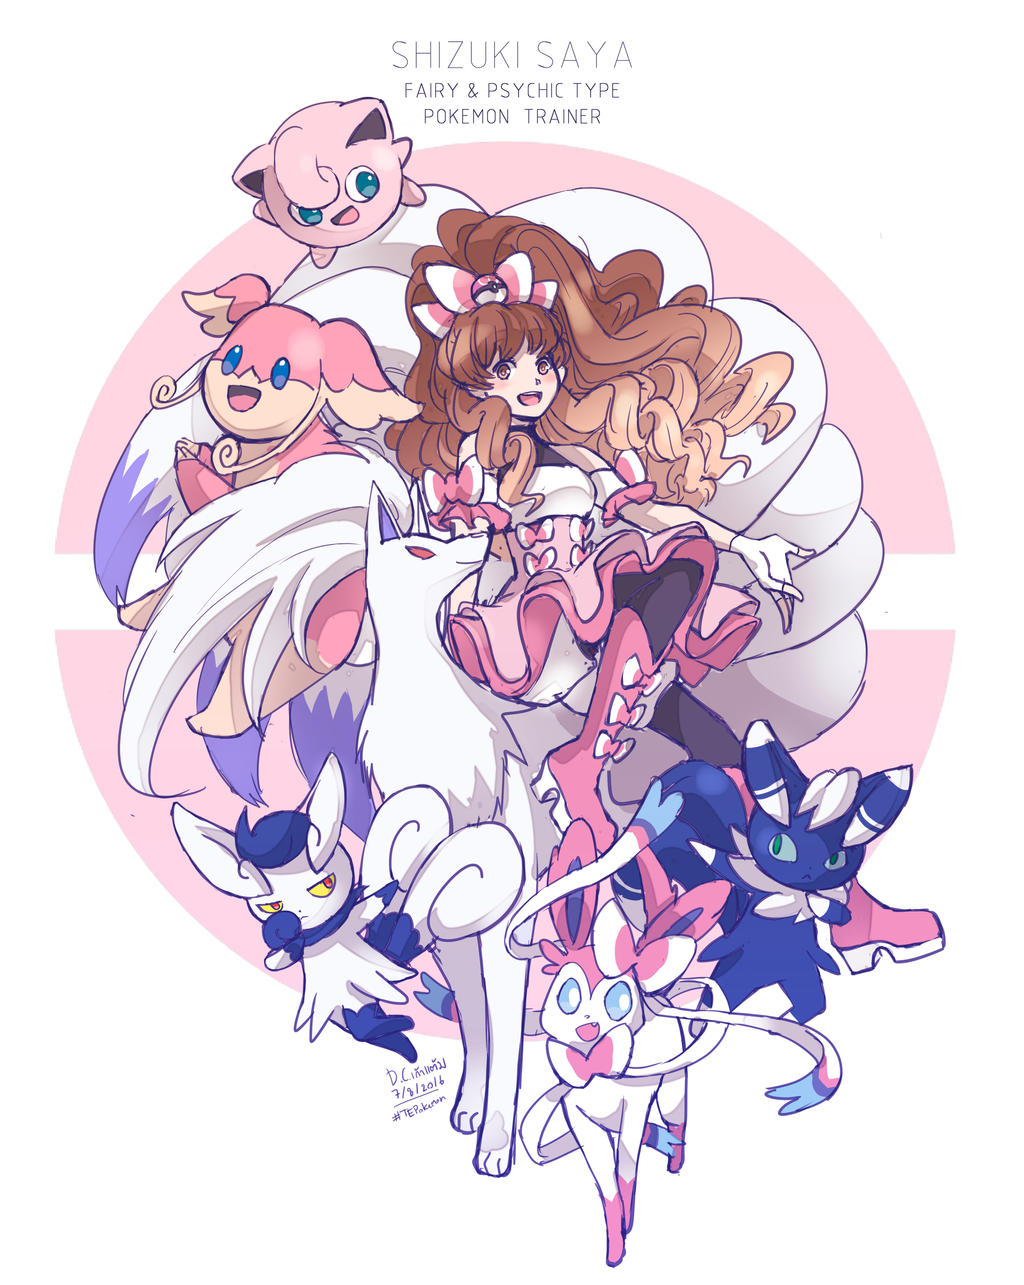 OC Pokemon Trainer Fairy and Psychic type by DC9spot on DeviantArt